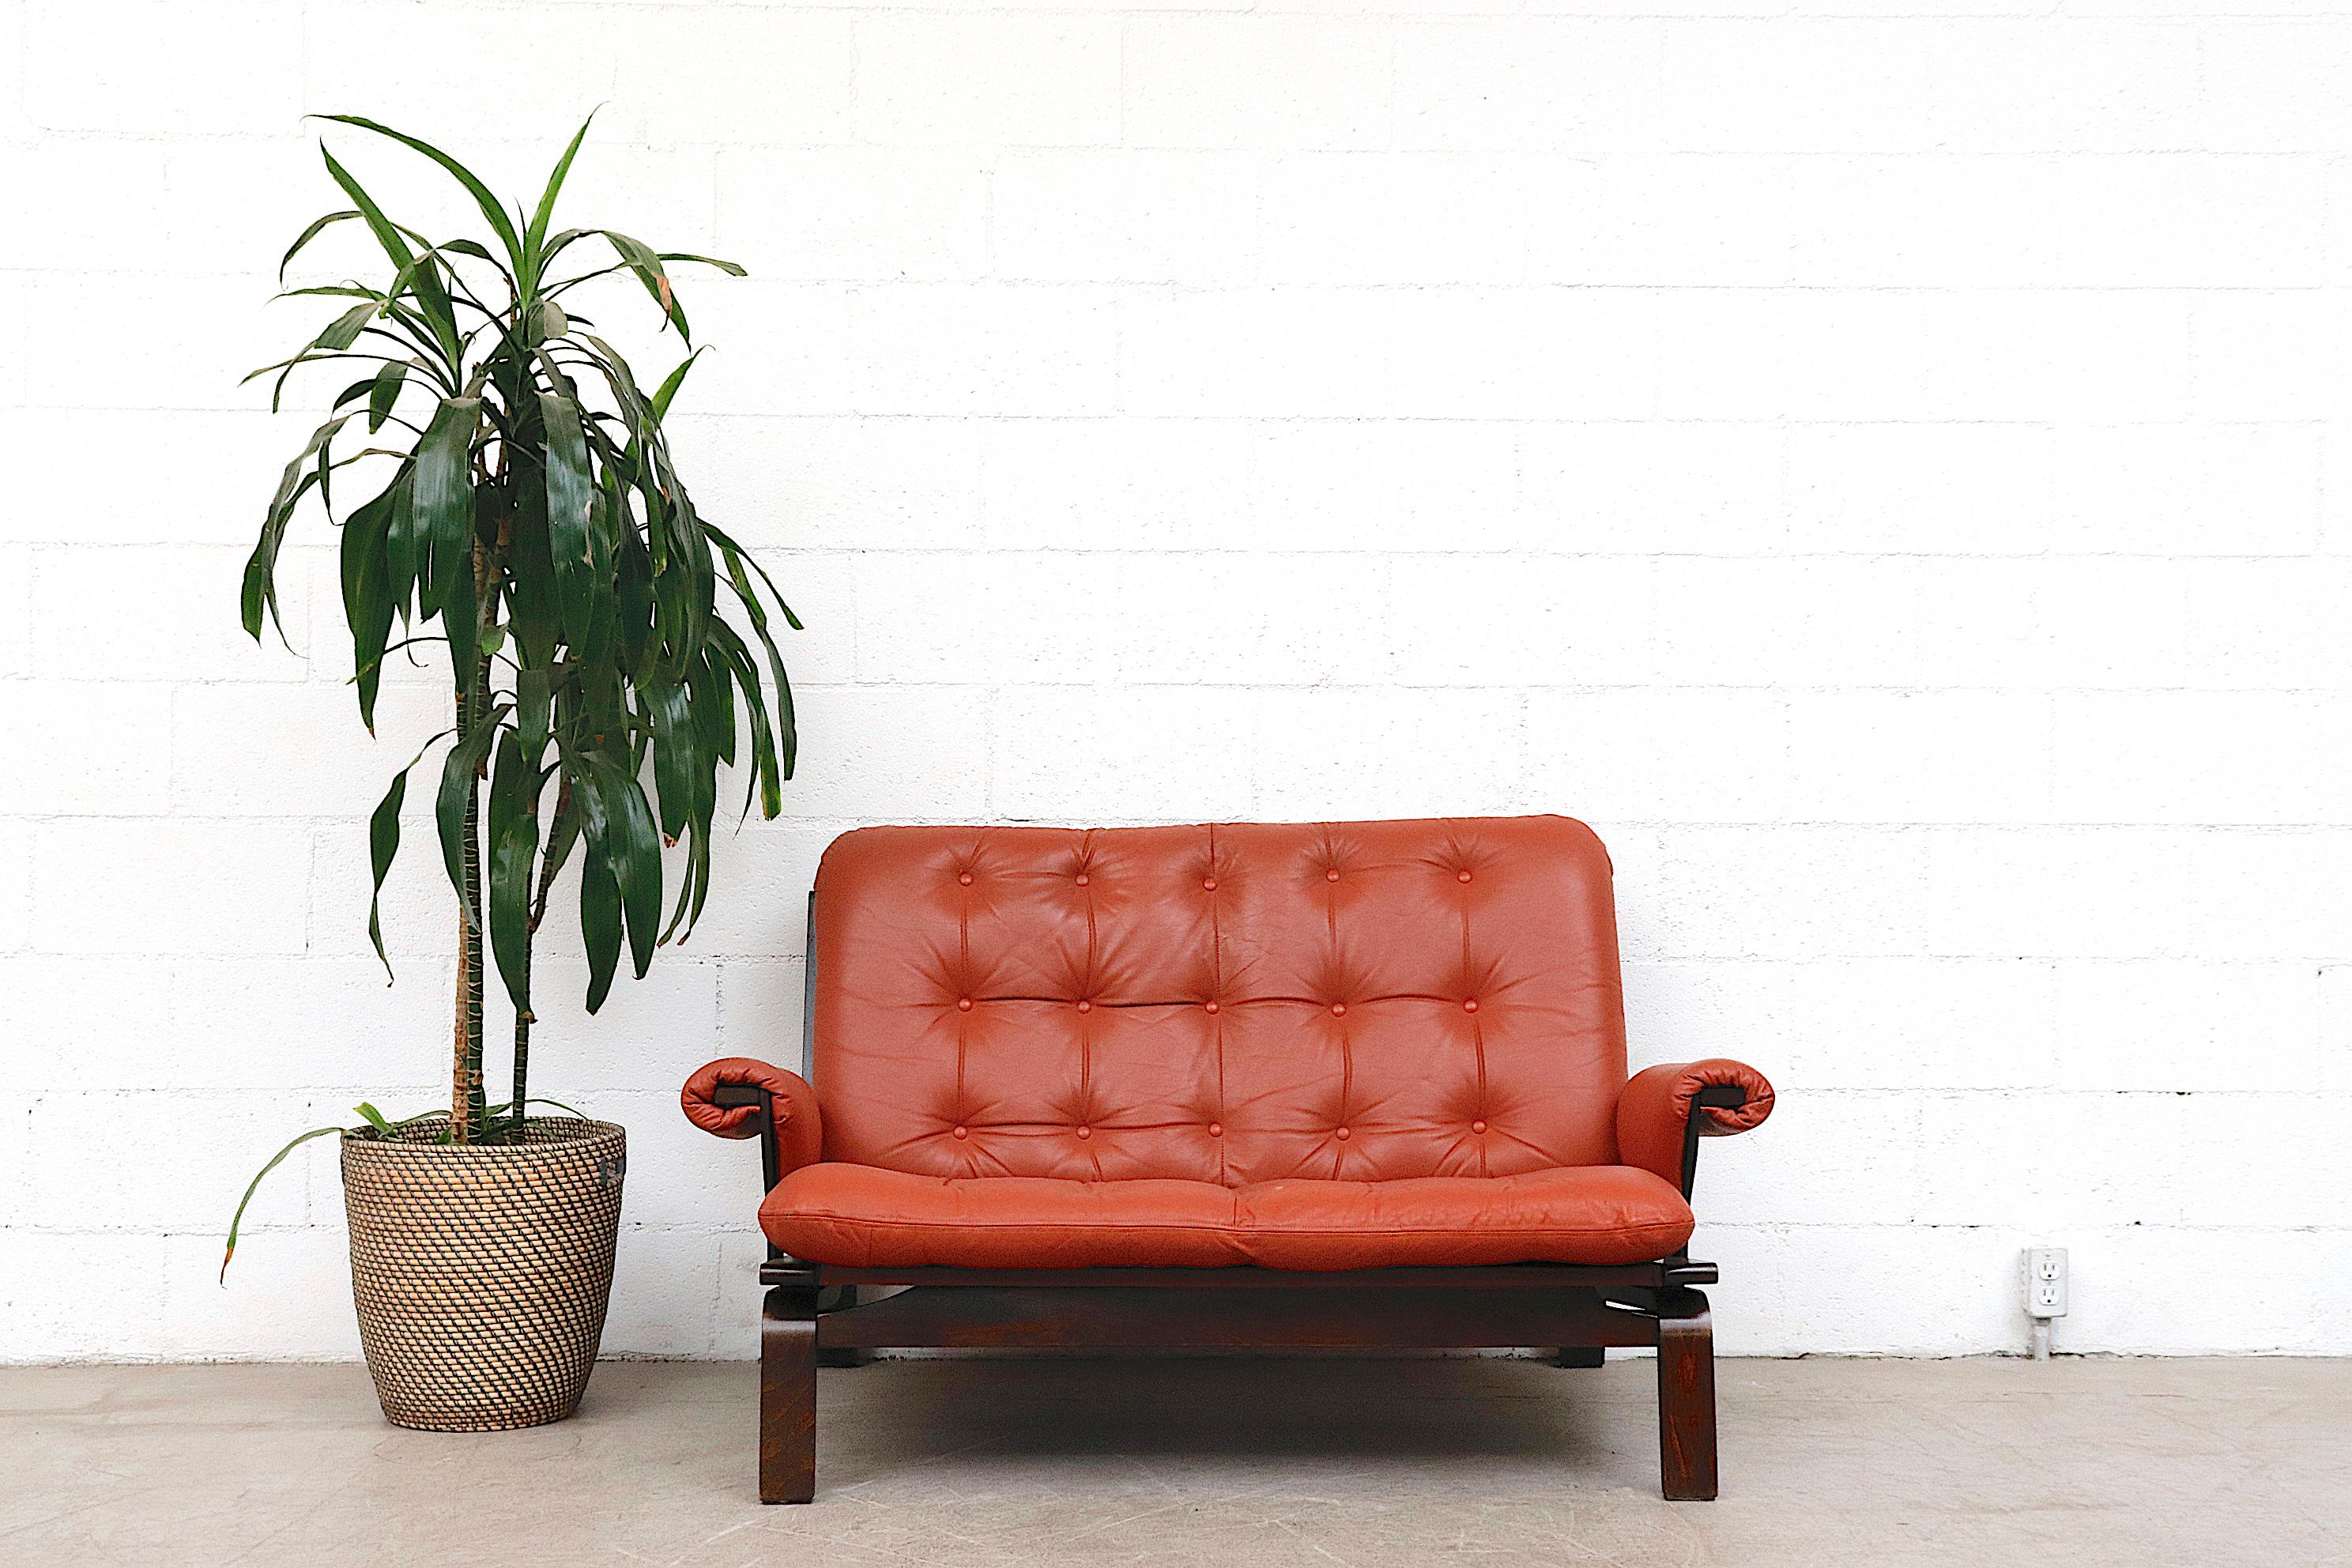 Arne Norell style coral leather loveseat with lightly refinished bentwood frame and padded leather arm rests. Canvas sling support in original condition with visible fading. Good overall condition. Wear is consistent with its age and usage.